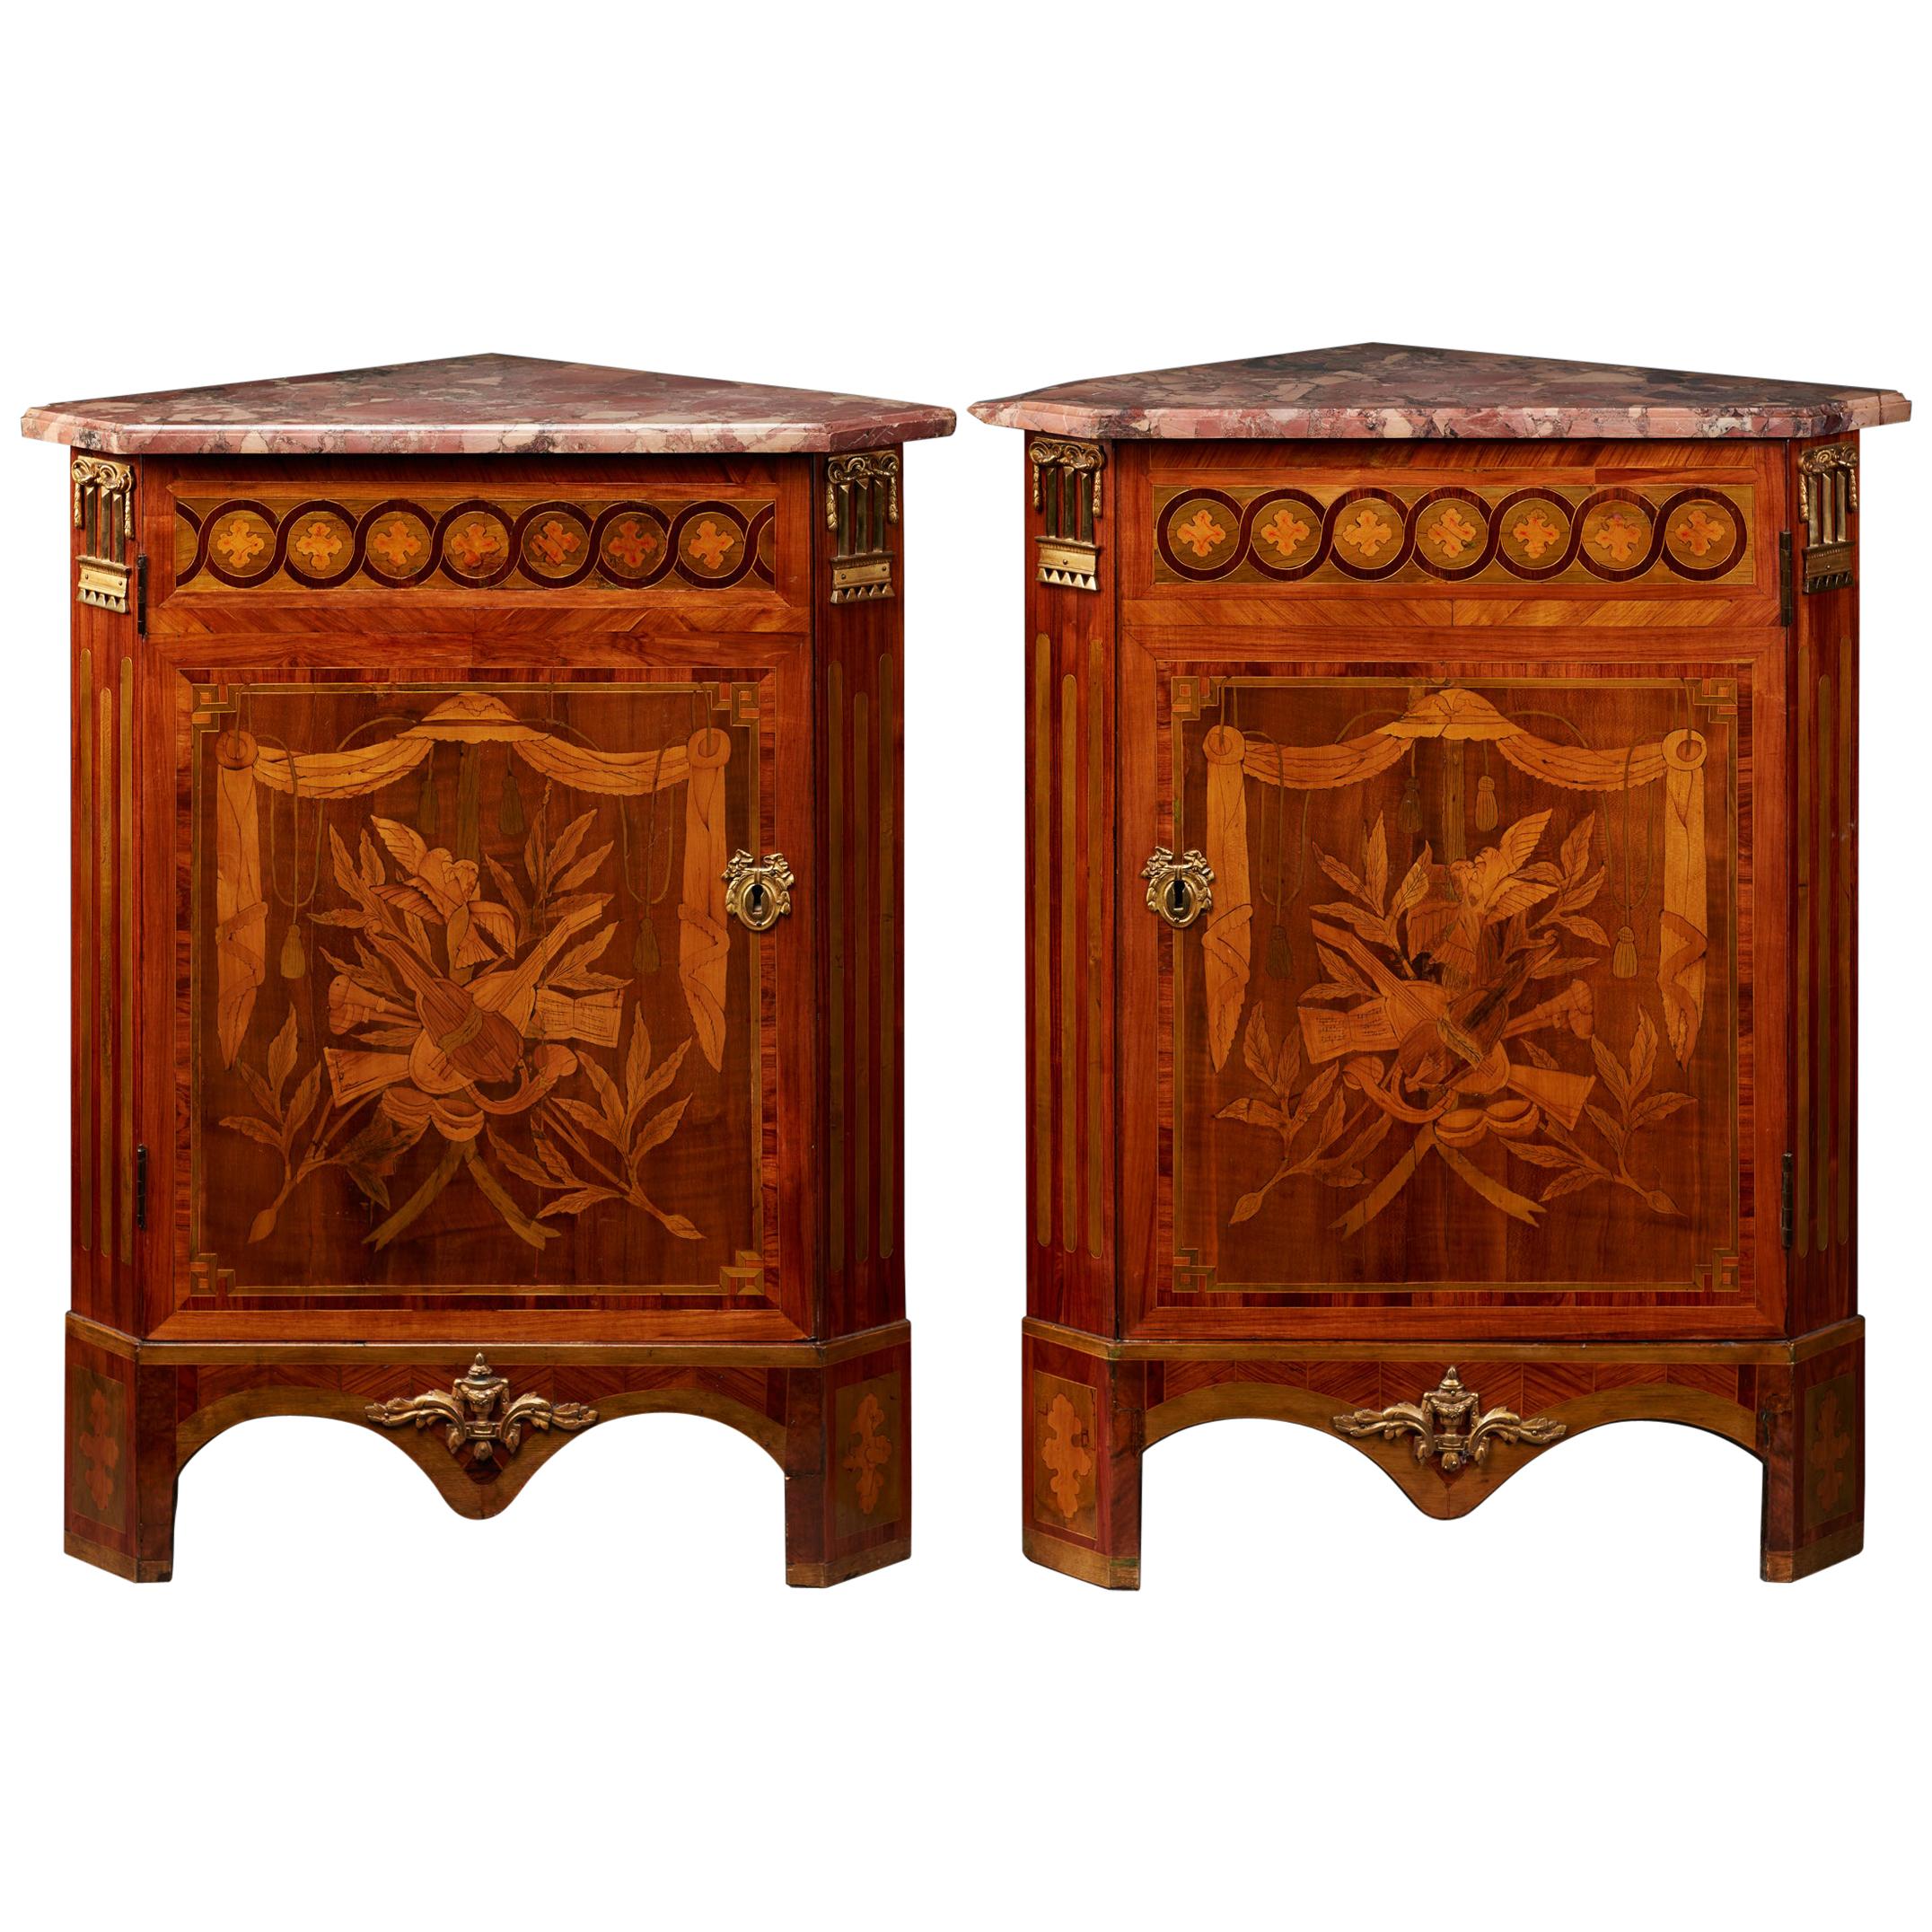 Pair of French 18th Century Louis XVI Corner Cabinets with Flower Marquetry